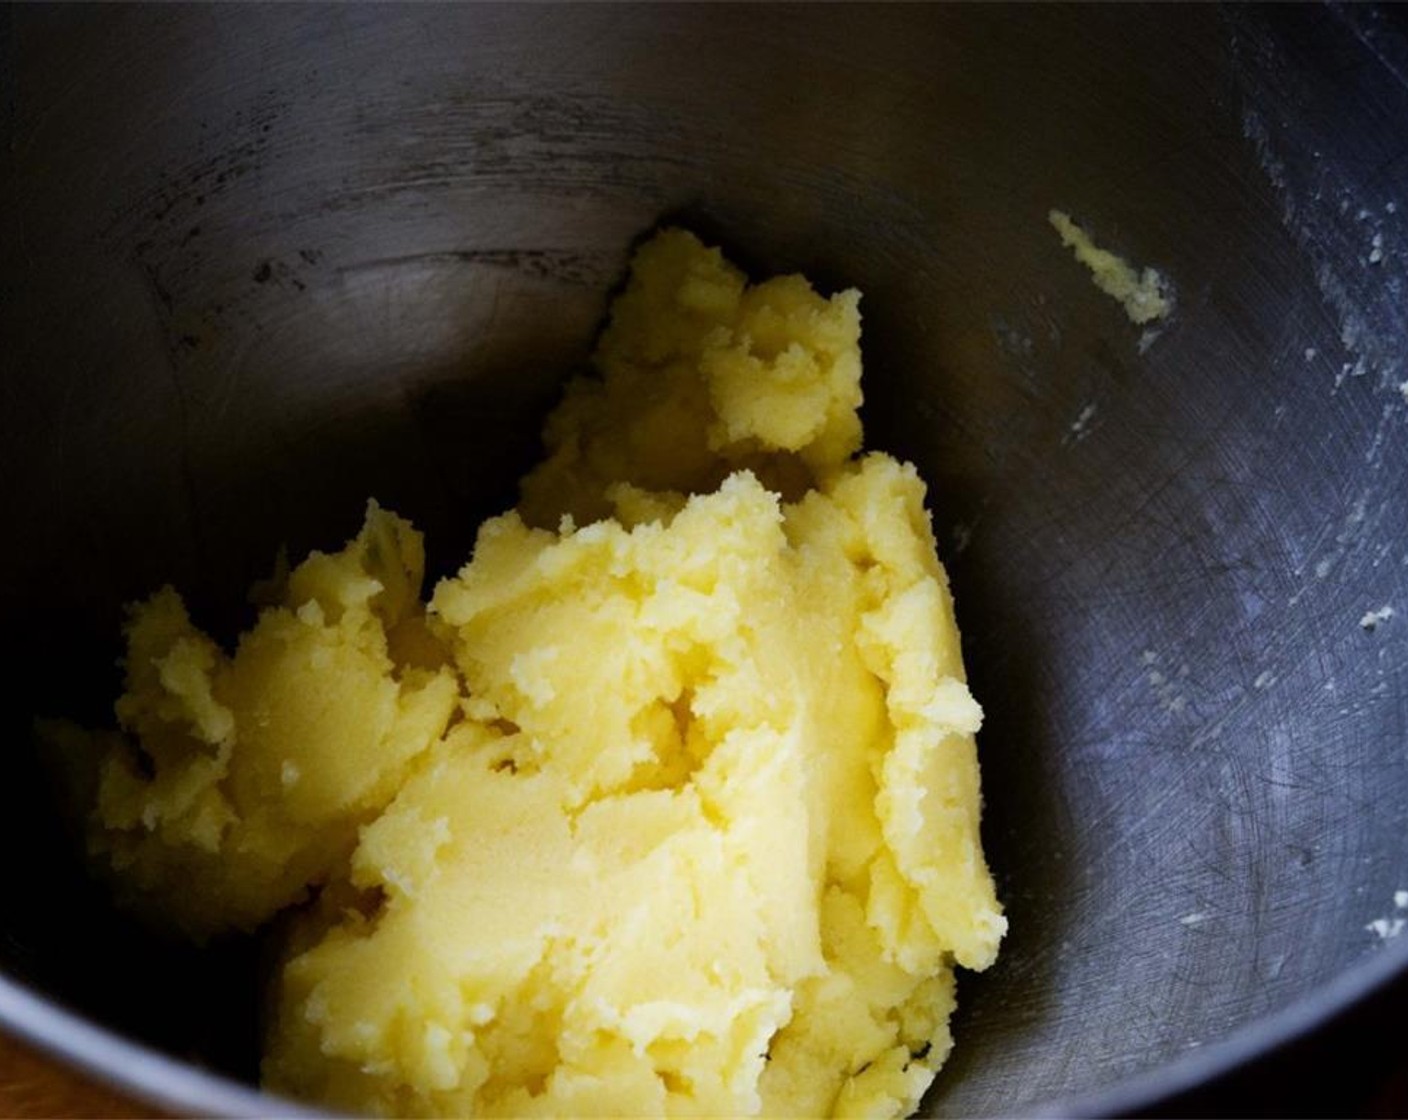 step 2 Start off by mixing Unsalted Butter (2/3 cup) and Granulated Sugar (3/4 cup) until creamy.